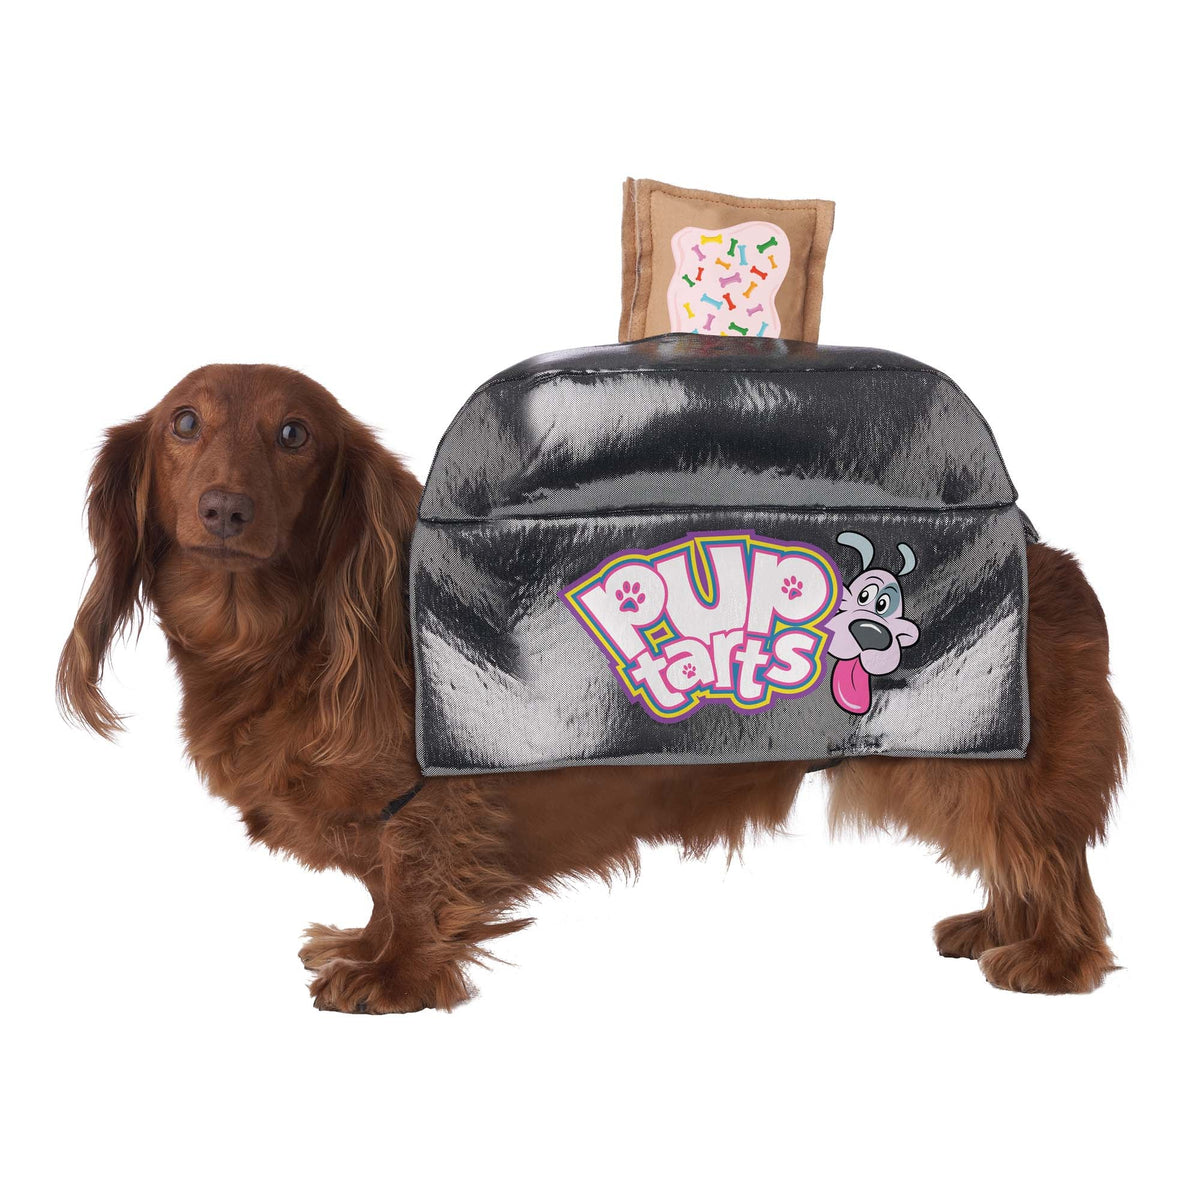 CALIFORNIA COSTUMES Costumes Pup Tarts Costume for Pets